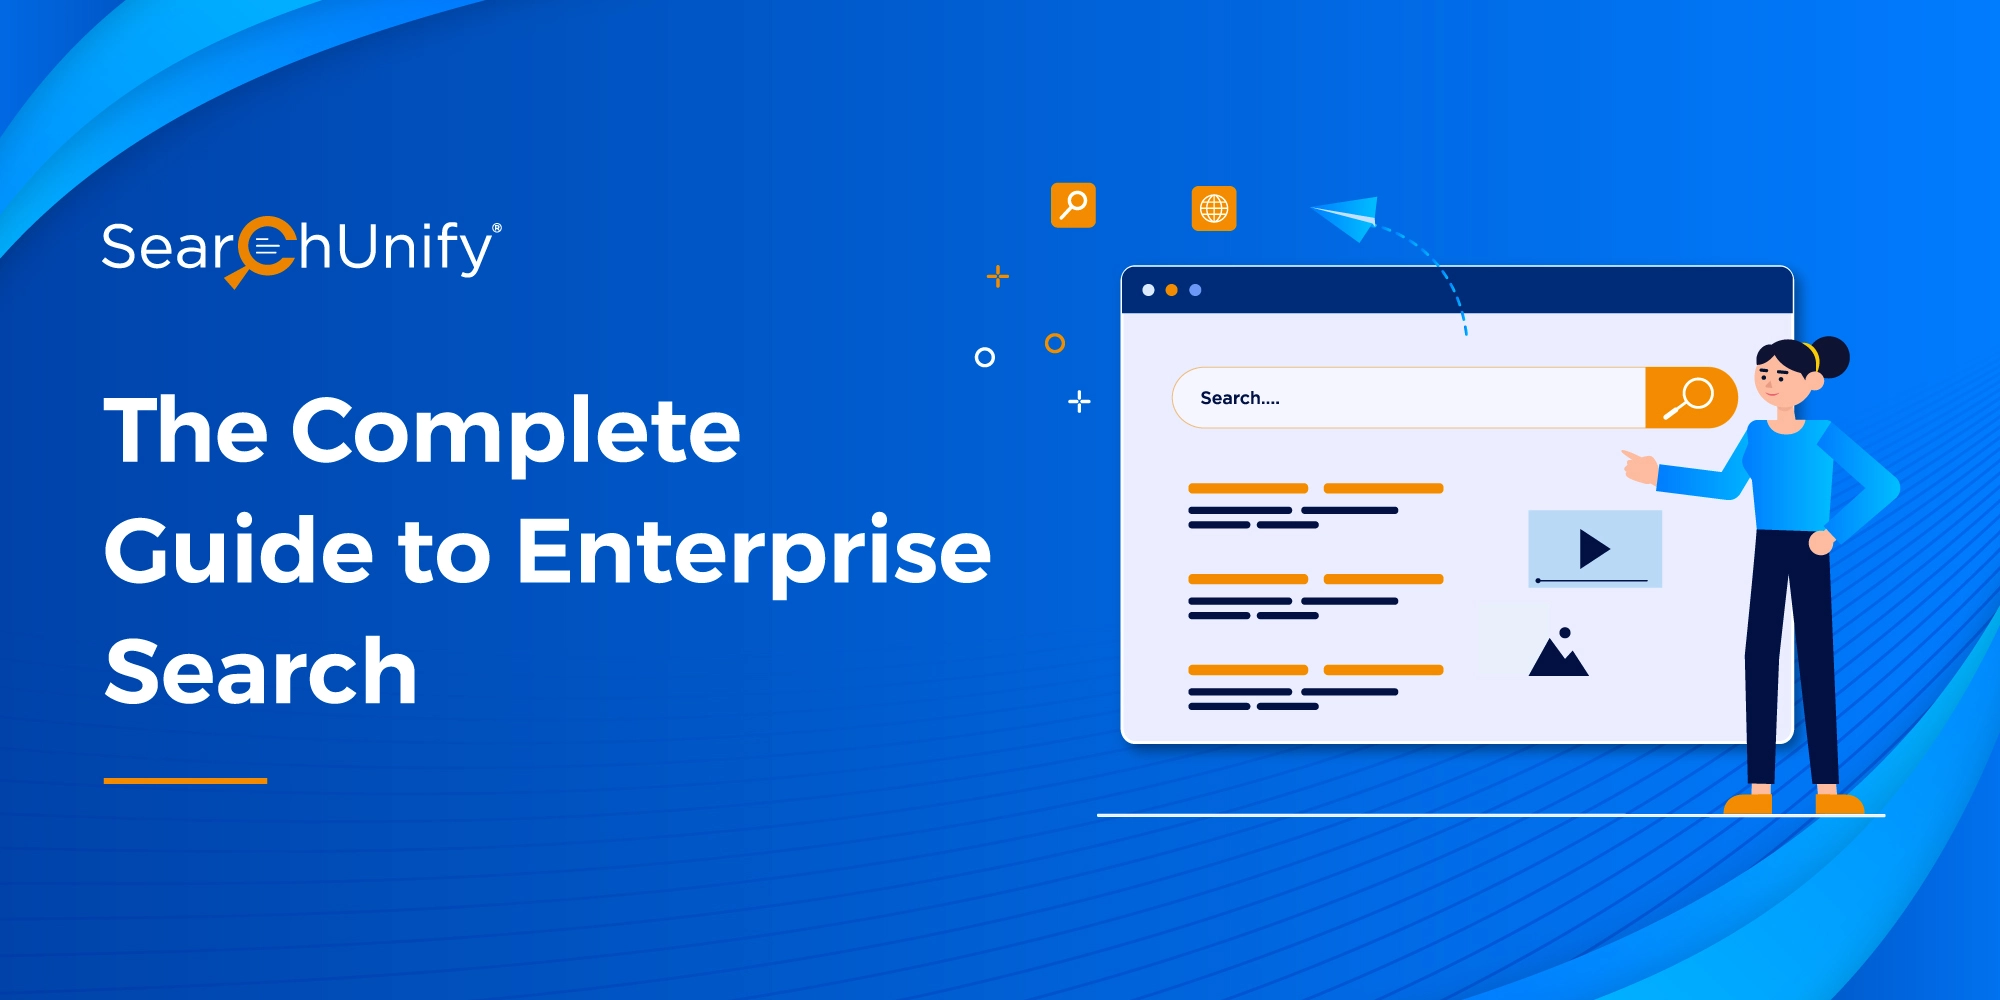 The Complete Guide to Enterprise Search